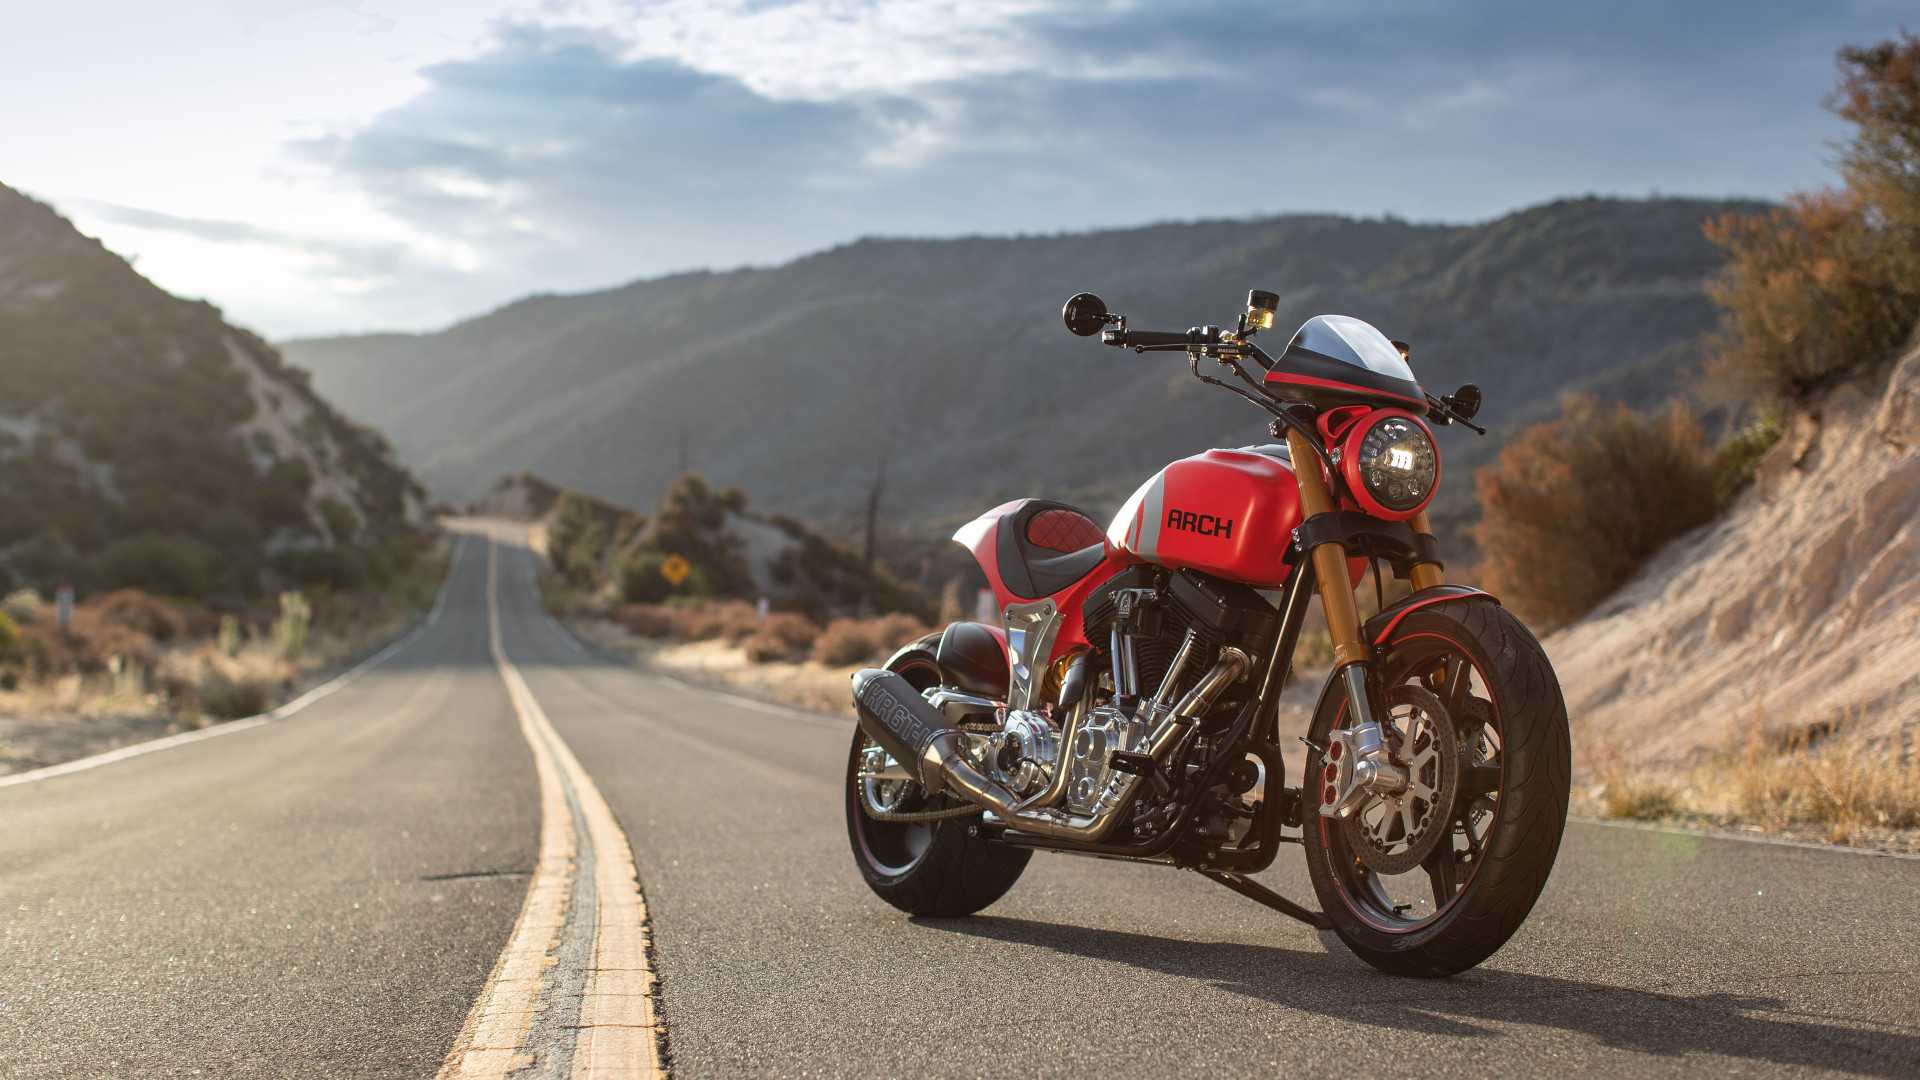 The Arch Motorcycles KRGT 1 Will Come To EICMA